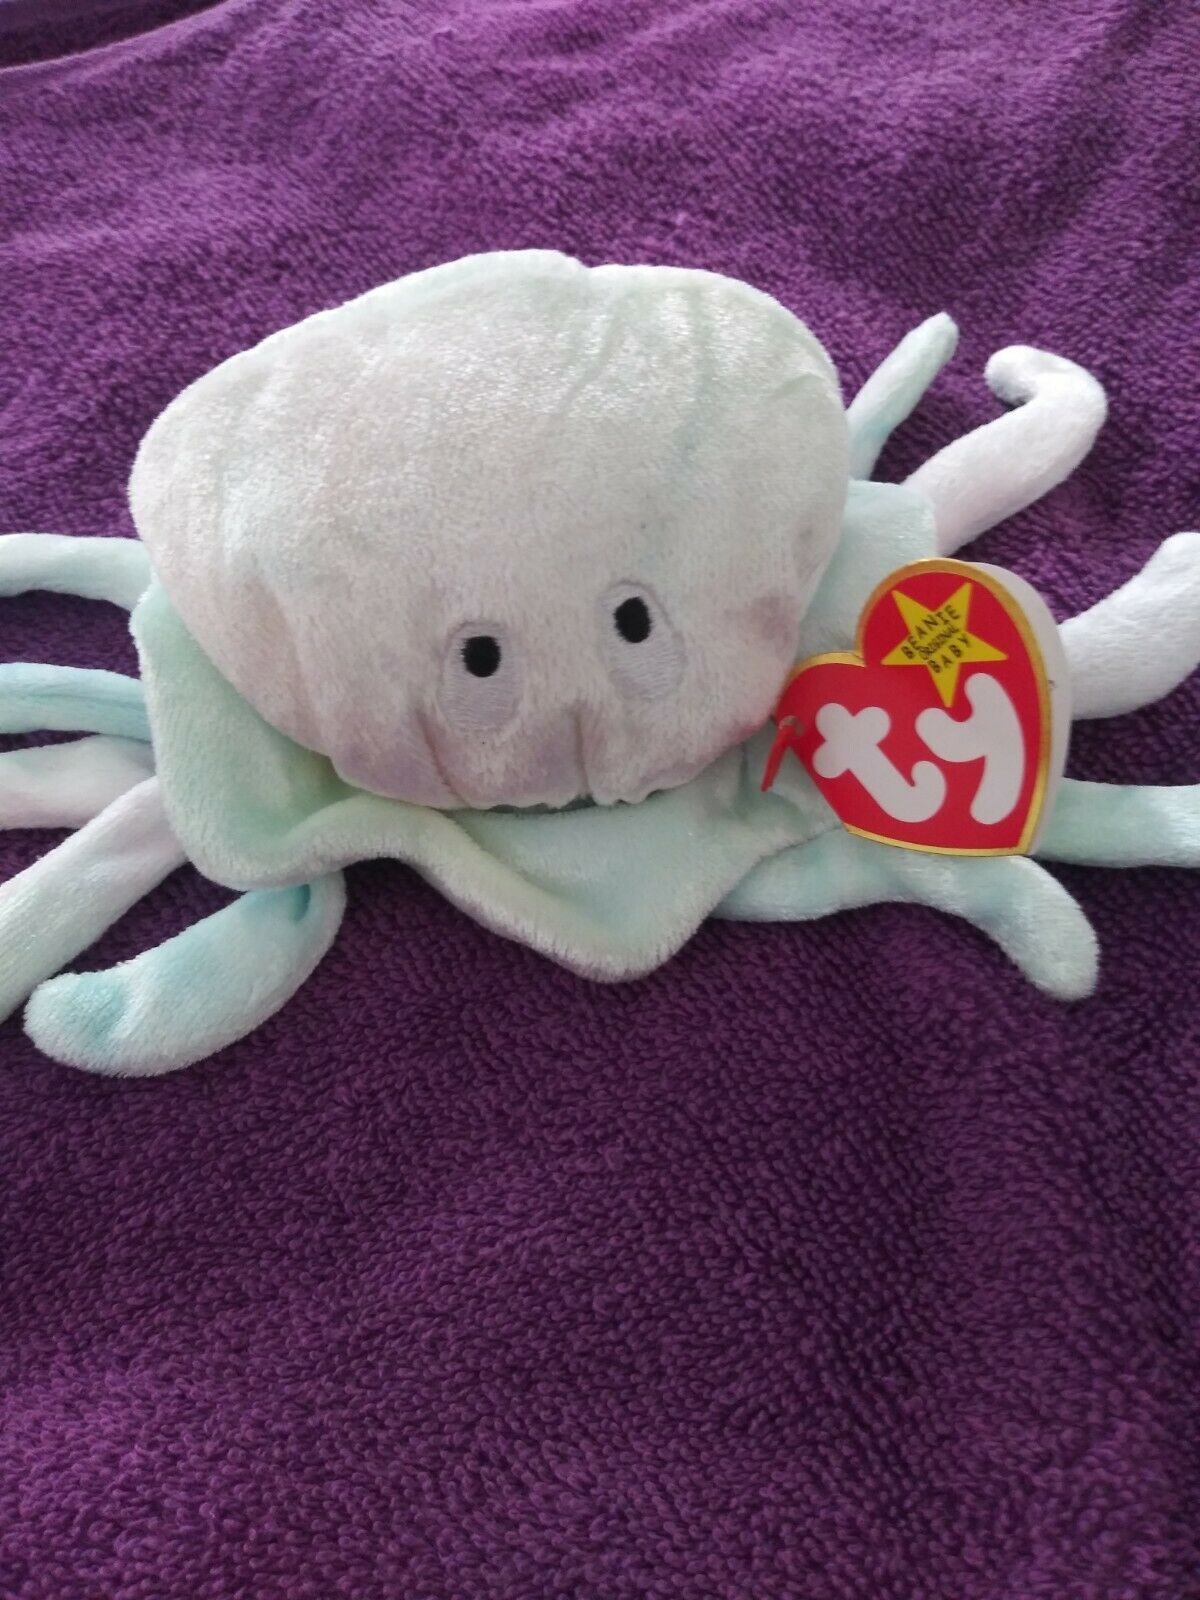 Gooch the Jellyfish Beanie Baby with tag error - Retired